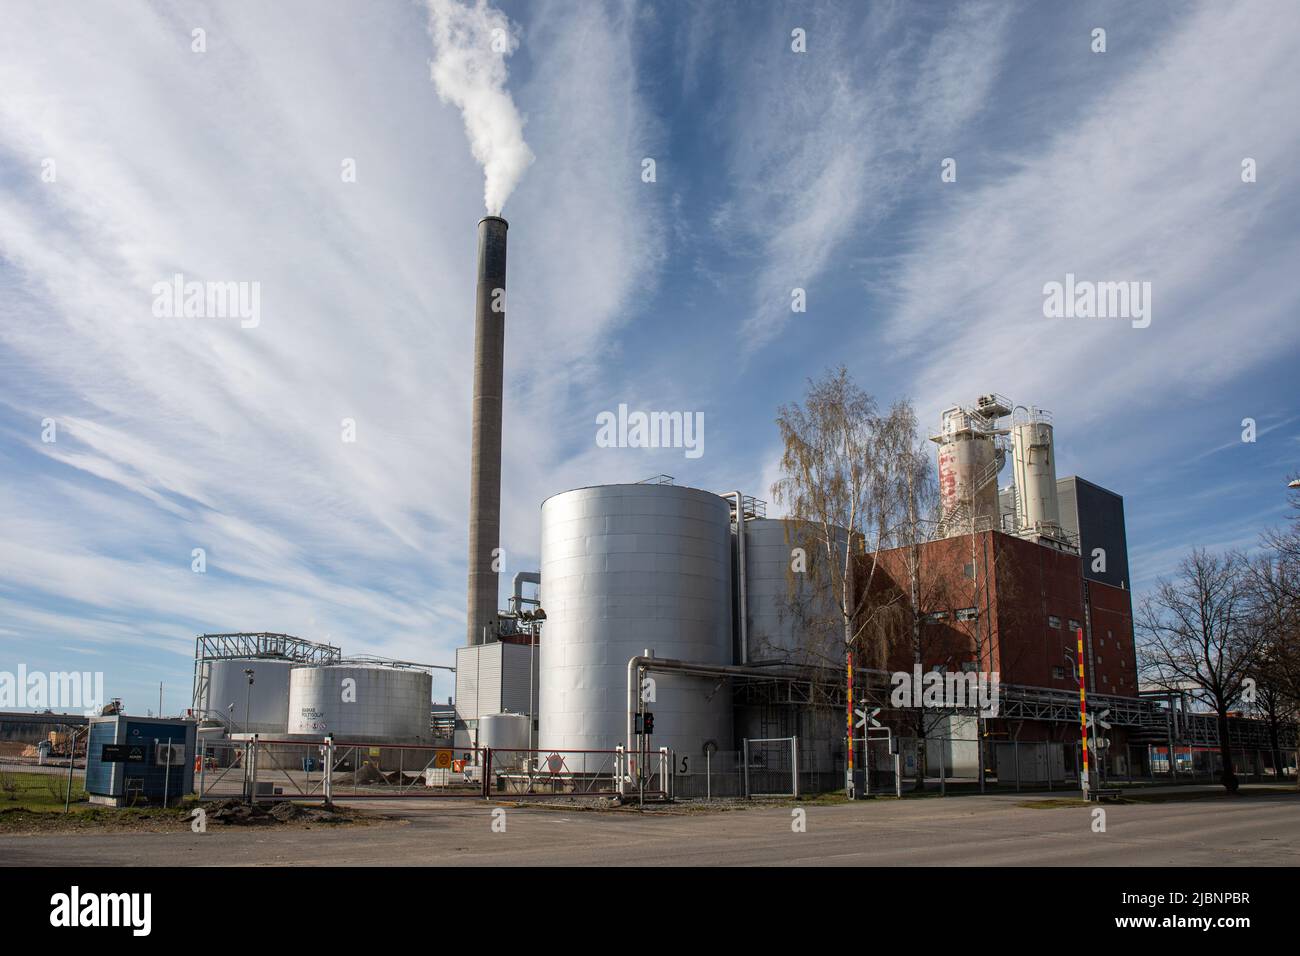 Stora Enso paper mill industrial structures in Varkaus, Finland Stock Photo